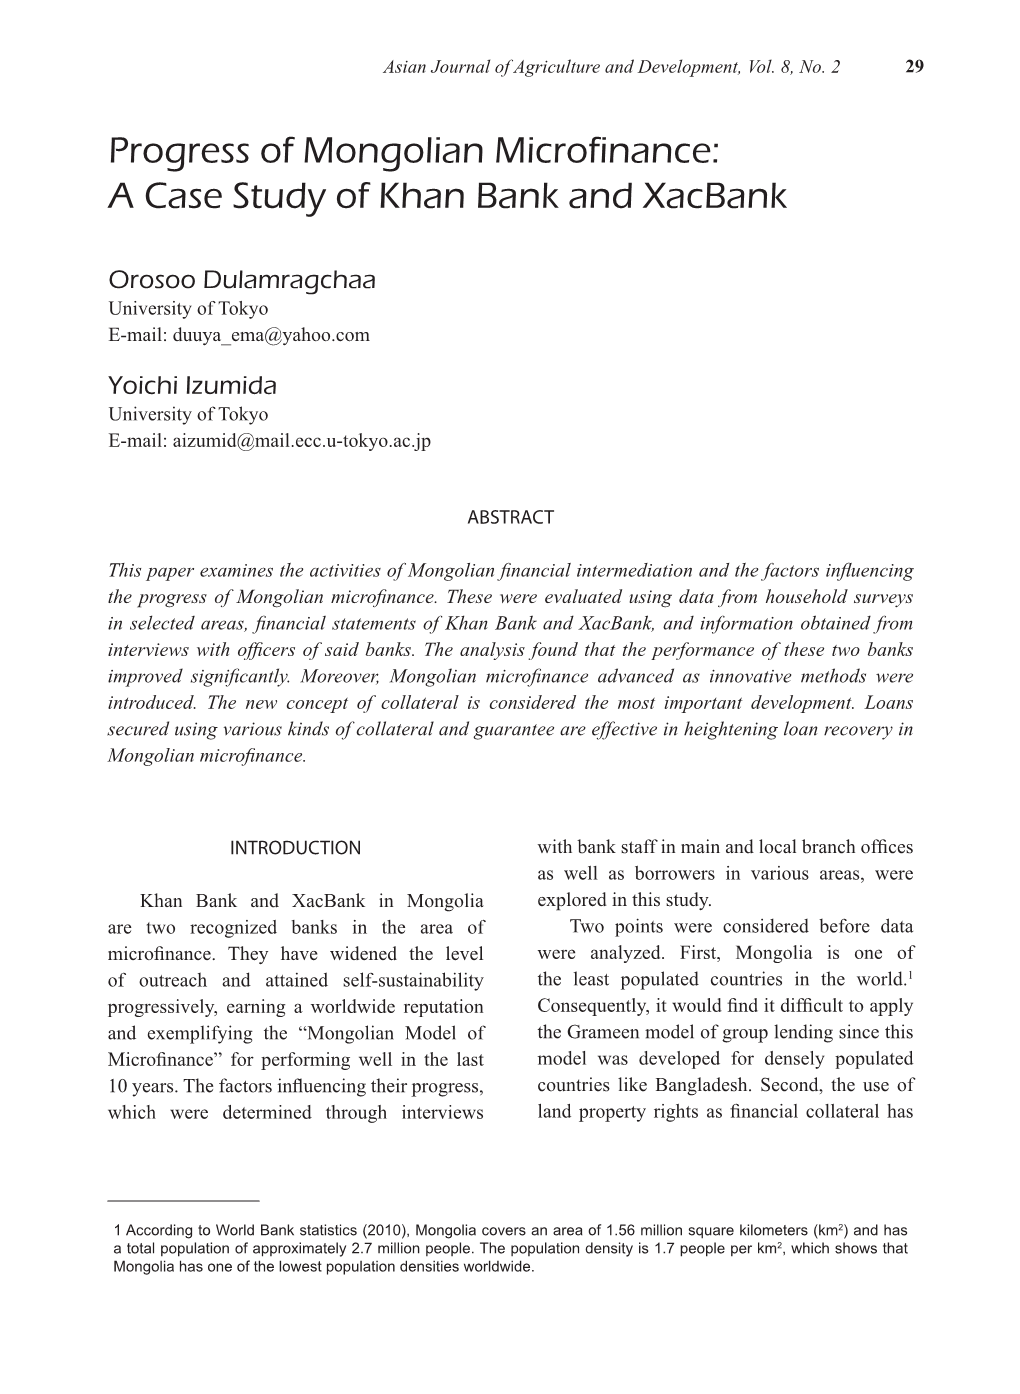 A Case Study of Khan Bank and Xacbank